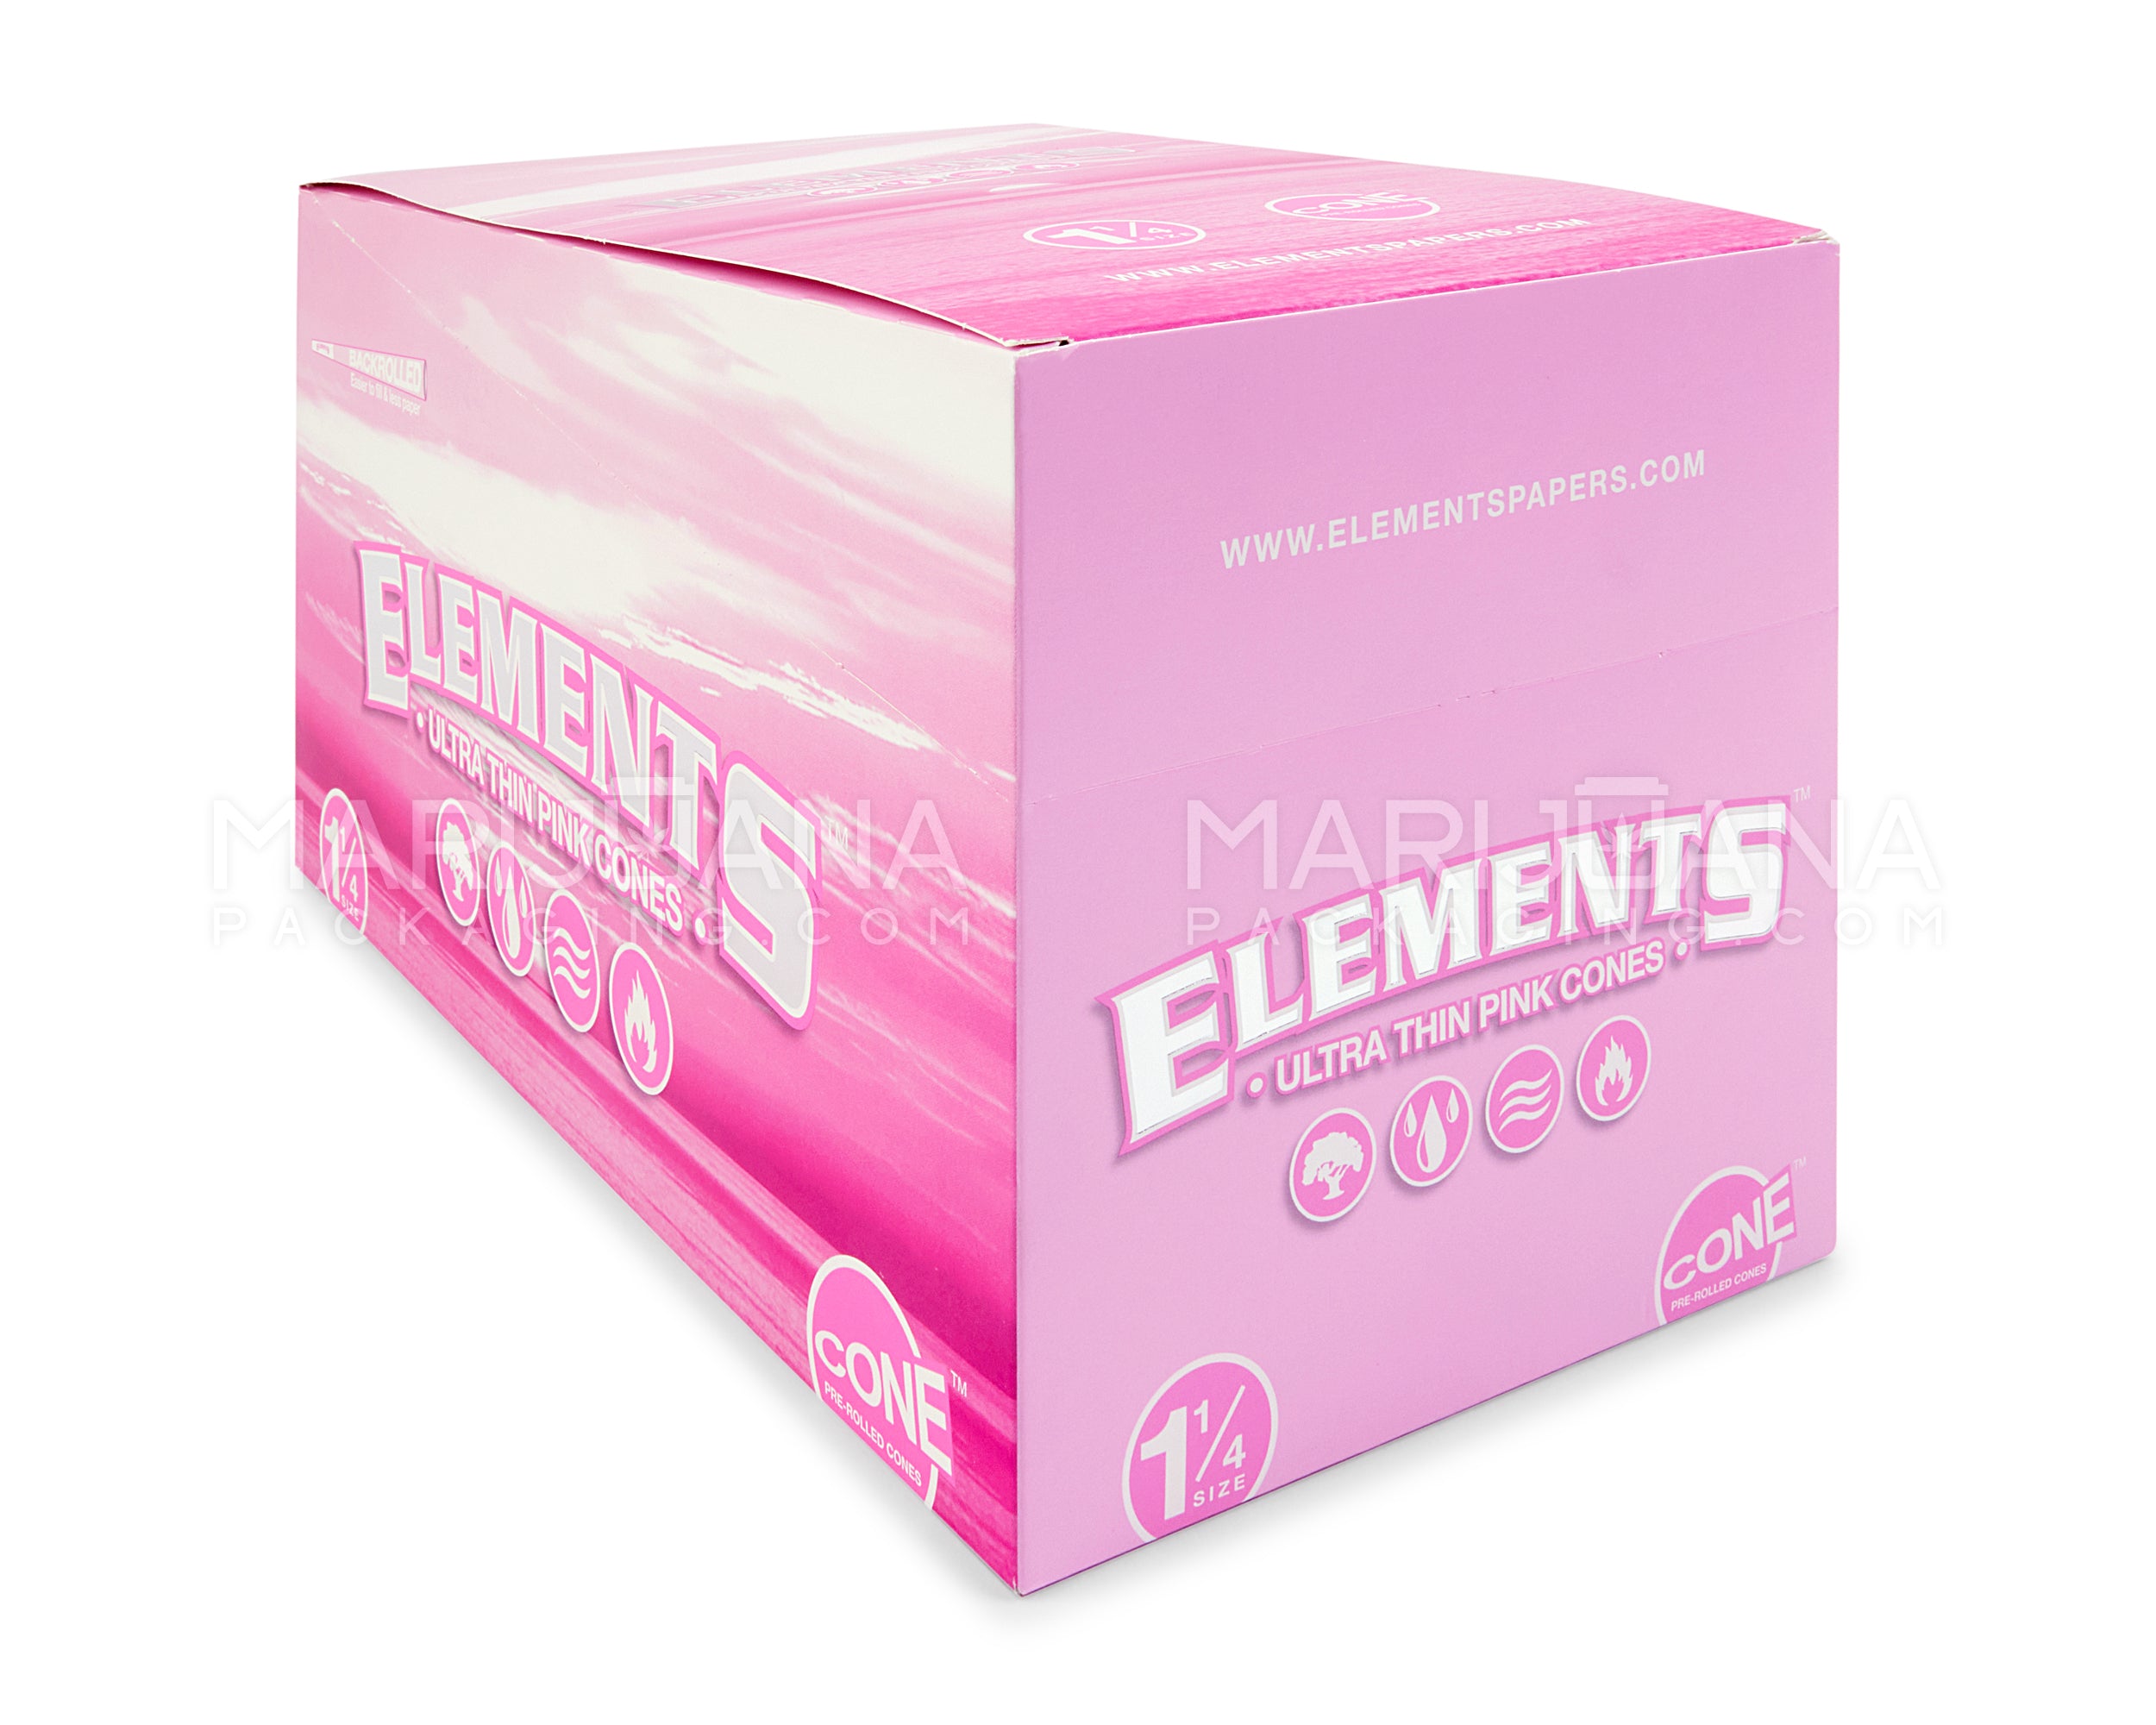 ELEMENTS | 'Retail Display' 1 1/4 Size Ultra Thin Pre-Rolled Cones | 84mm - Pink Rice Paper - 32 Count - 5